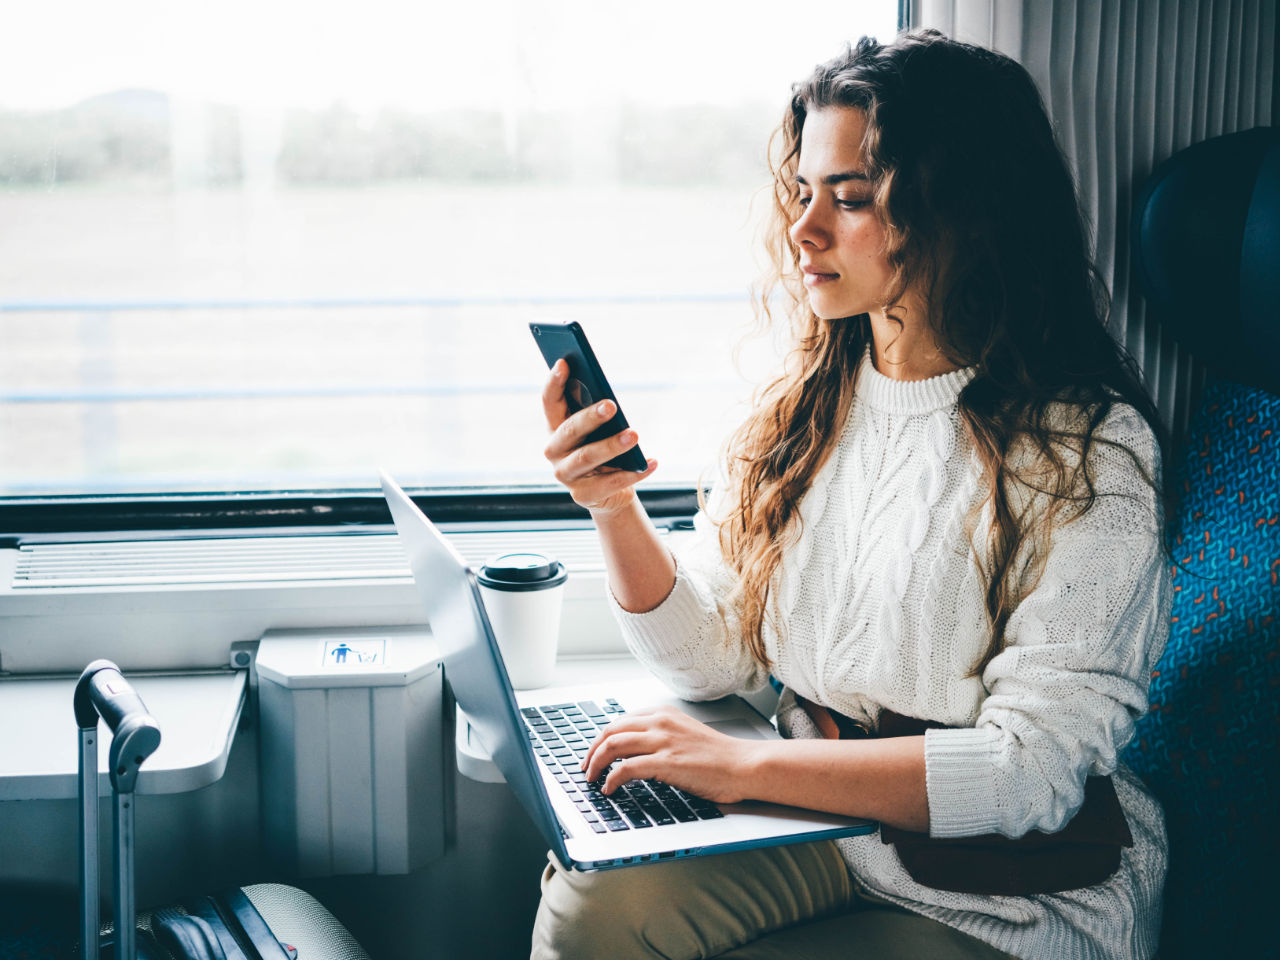 Young professional in train with laptop and smartphone